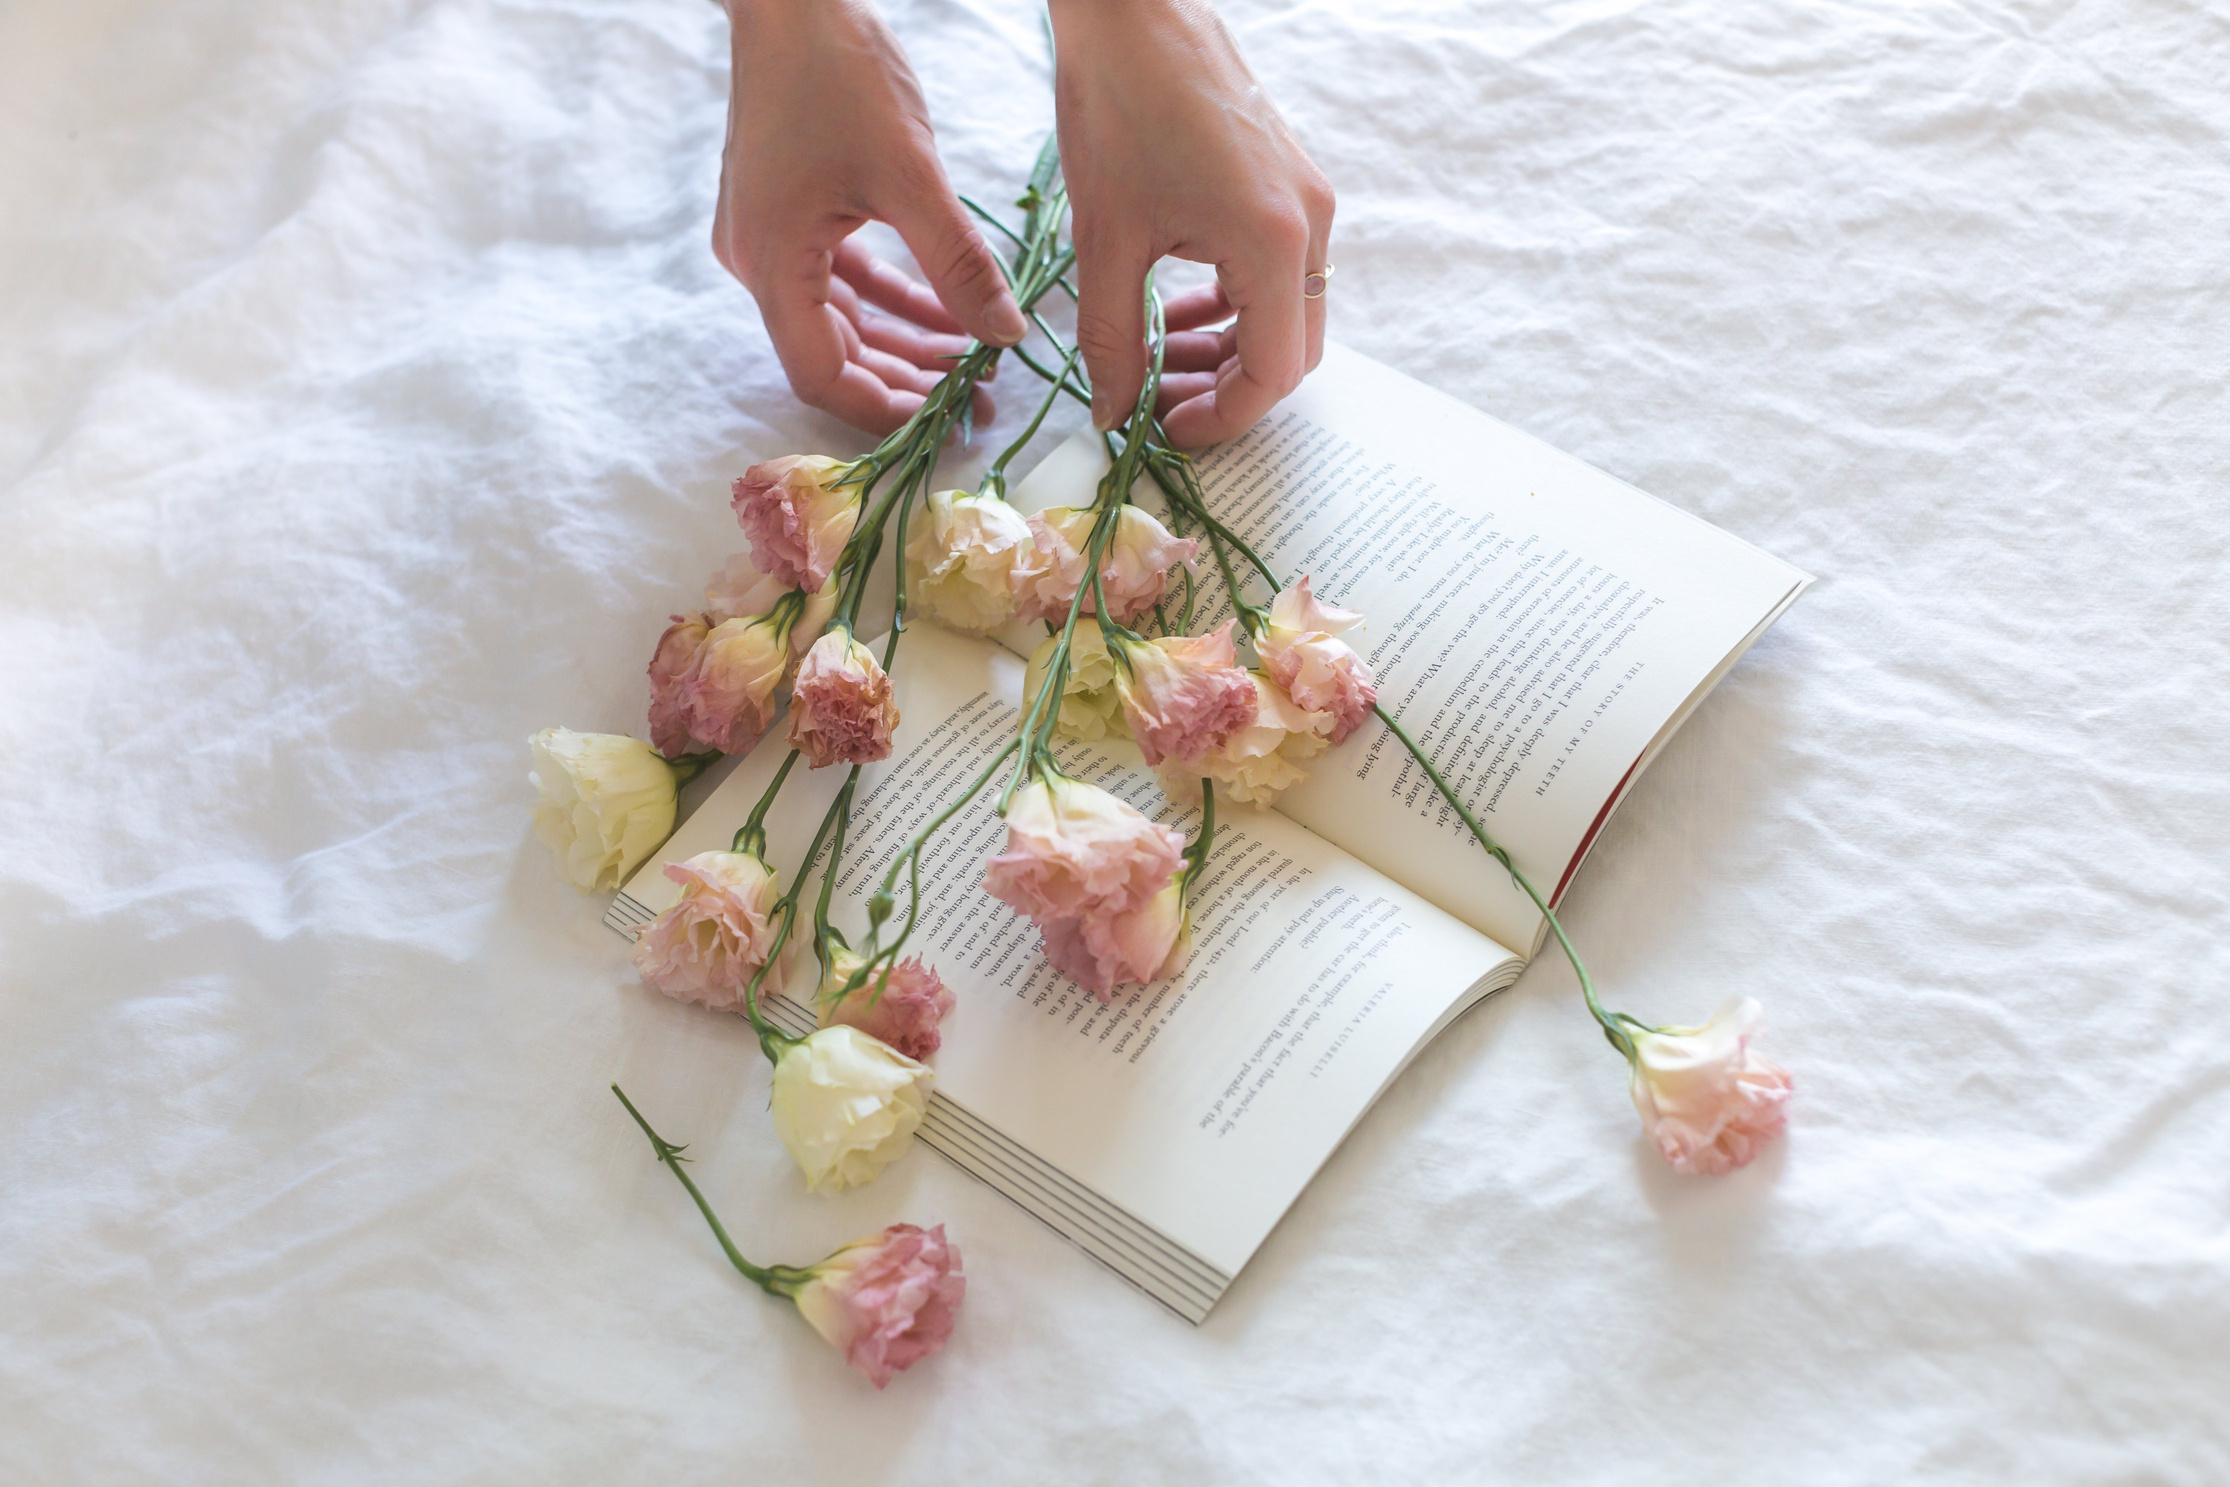 Pink-and-white Roses on Top of Open Book Nestled on White Textile